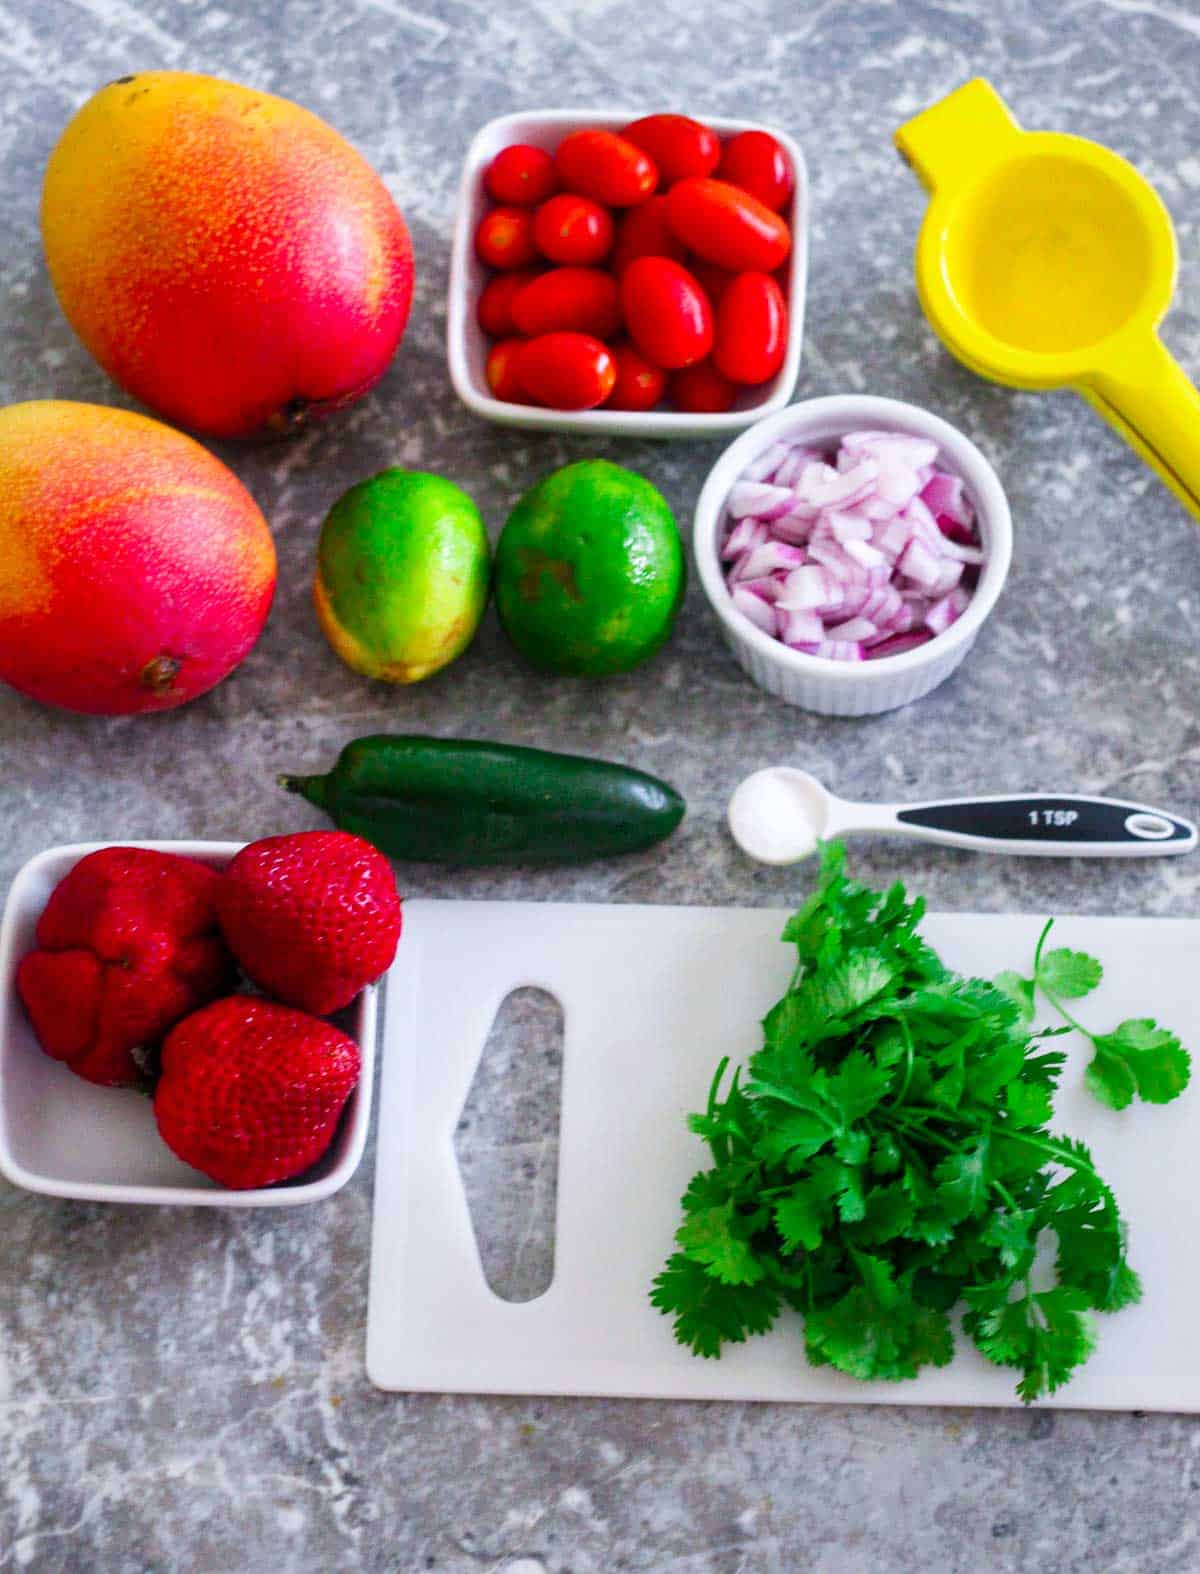 Ingredients for salsa lined up: 2 mangoes, 3 strawberries, a cup of grape tomatoes, chopped red onion, a jalapeño, a tso of seasalt, cilantro, limes and a citrus squeezer. 